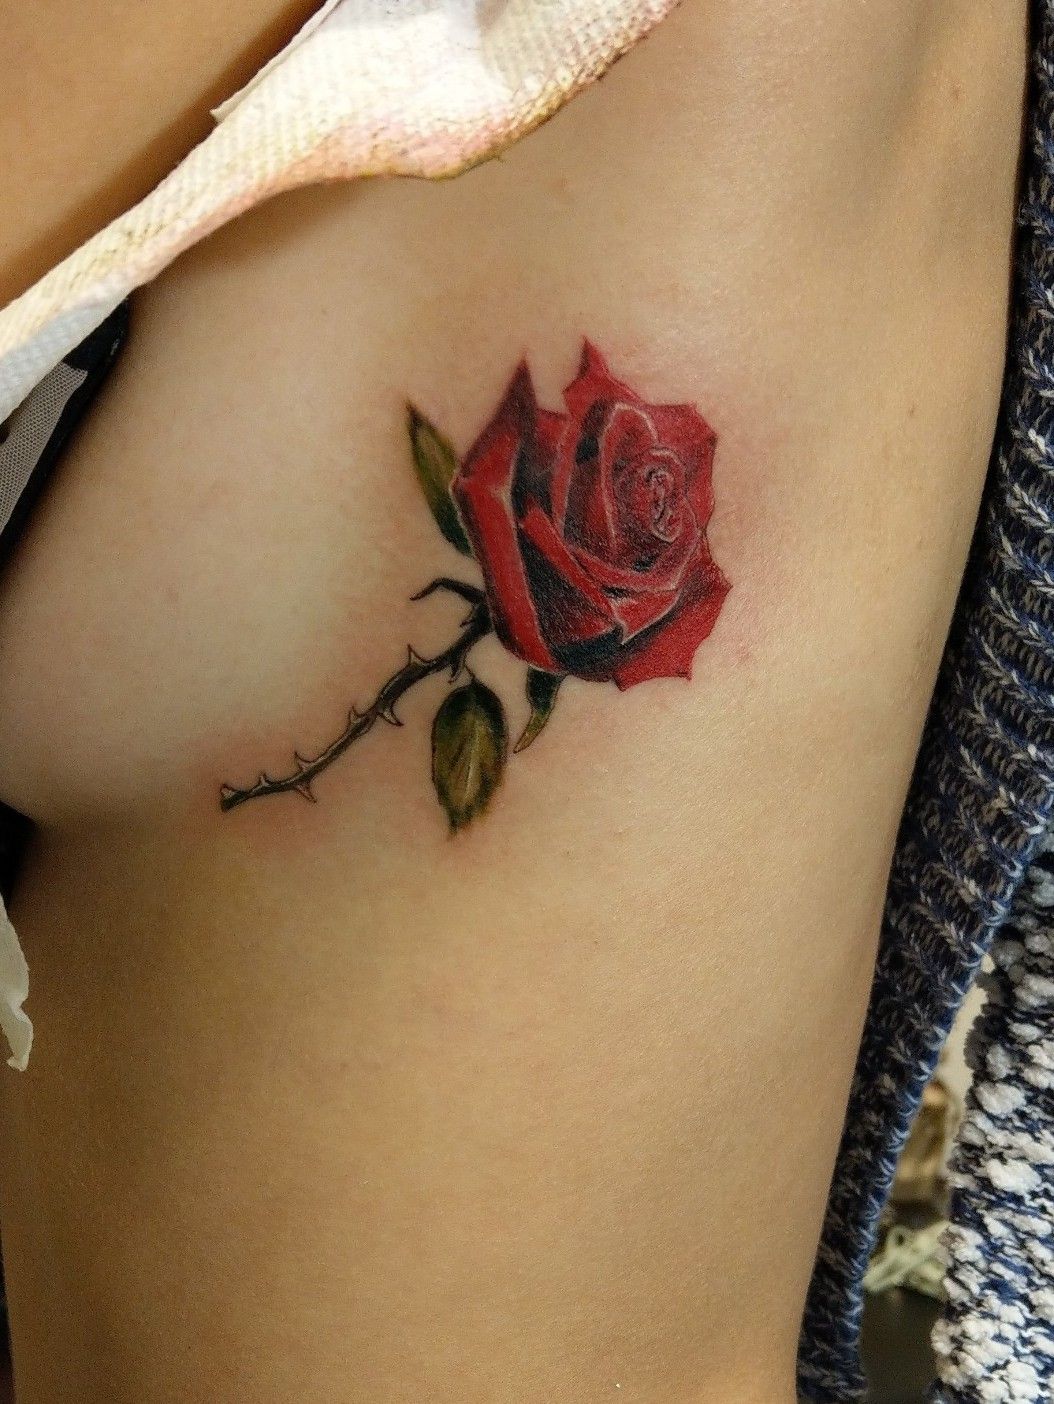 Tattoo tagged with flower side boob small single needle languages  tiny rose ifttt little nature english brave english word word  ghinko  inkedappcom